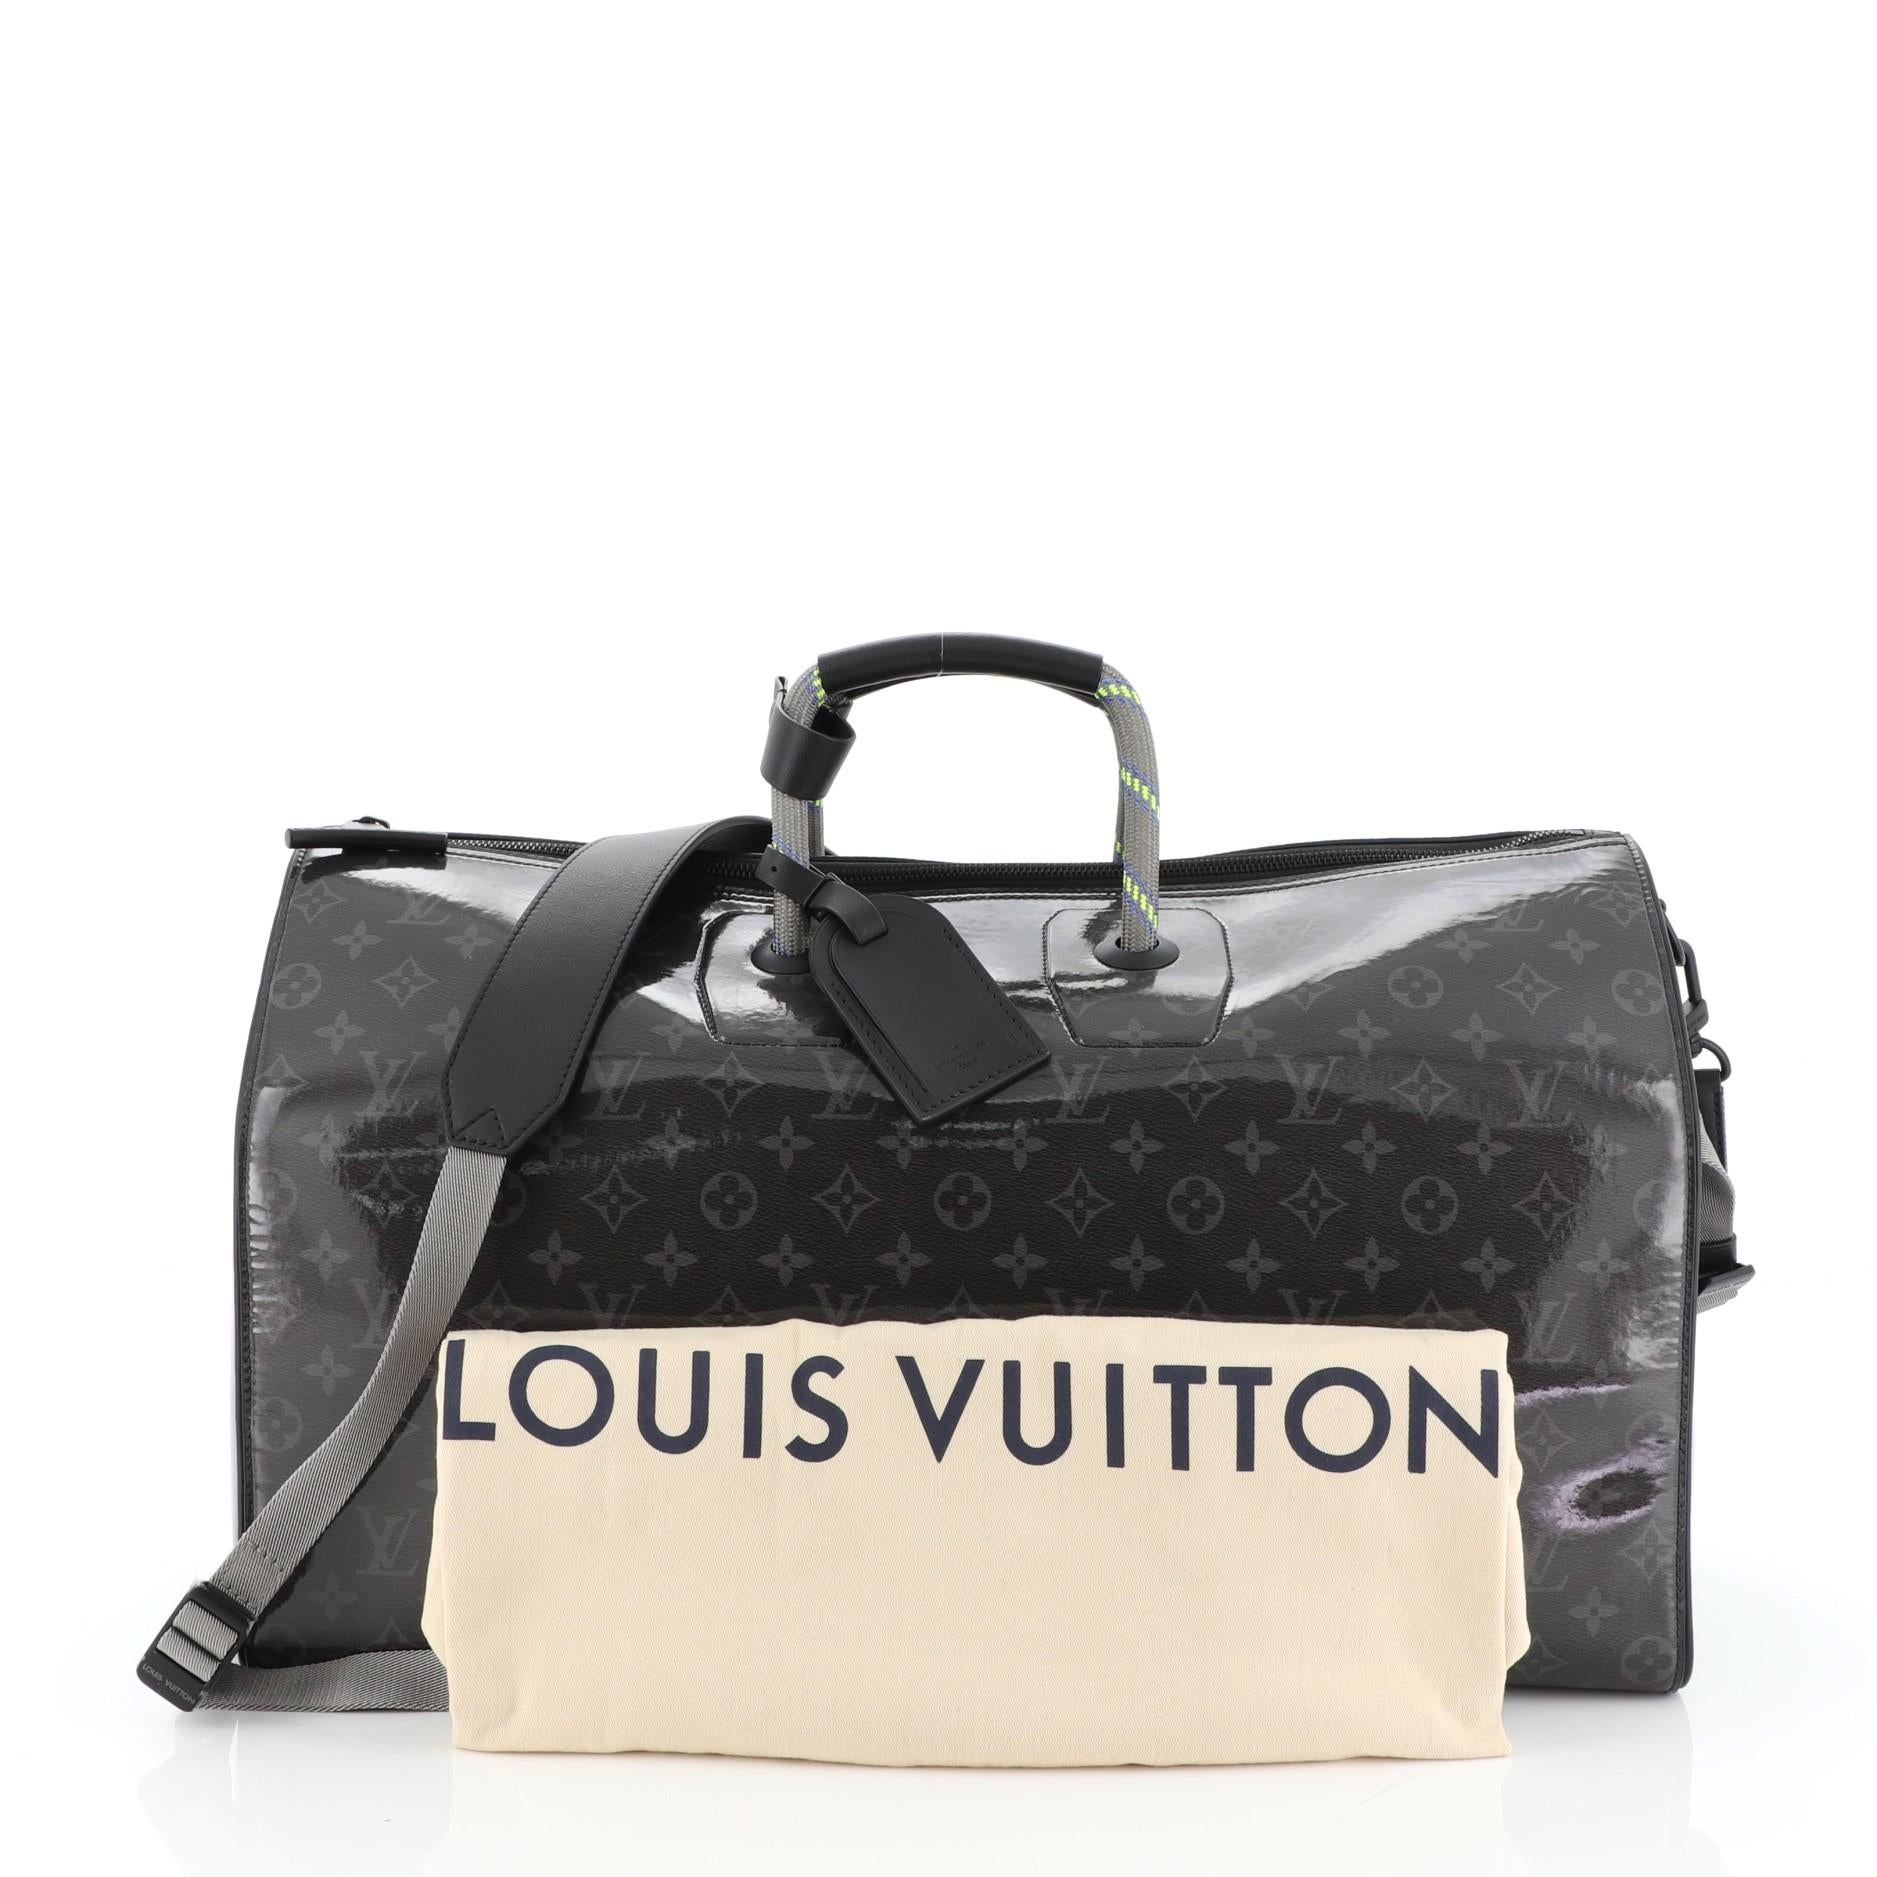 This Louis Vuitton Keepall Bandouliere Bag Limited Edition Monogram Glaze Eclipse Canvas 50, crafted in monogram glaze eclipse canvas, features dual top handles and black-tone hardware. Its zip closure opens to a black fabric interior. Authenticity